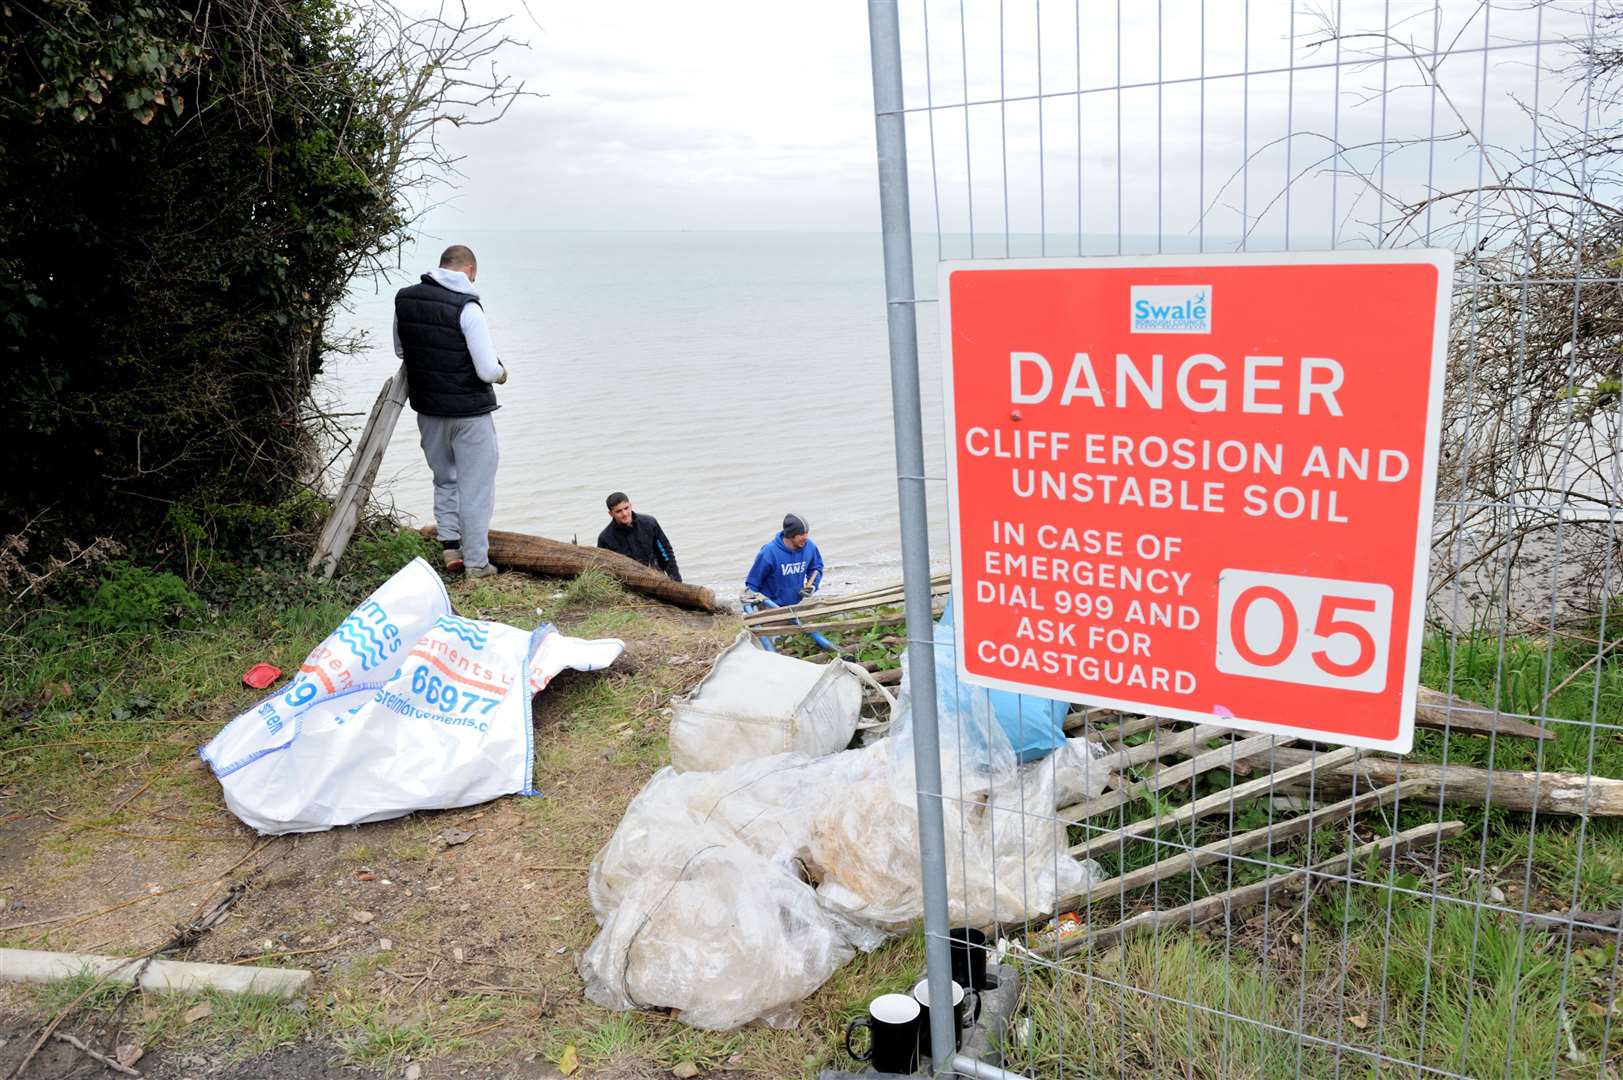 Netting was put down in 2016 in a bid to limit erosion